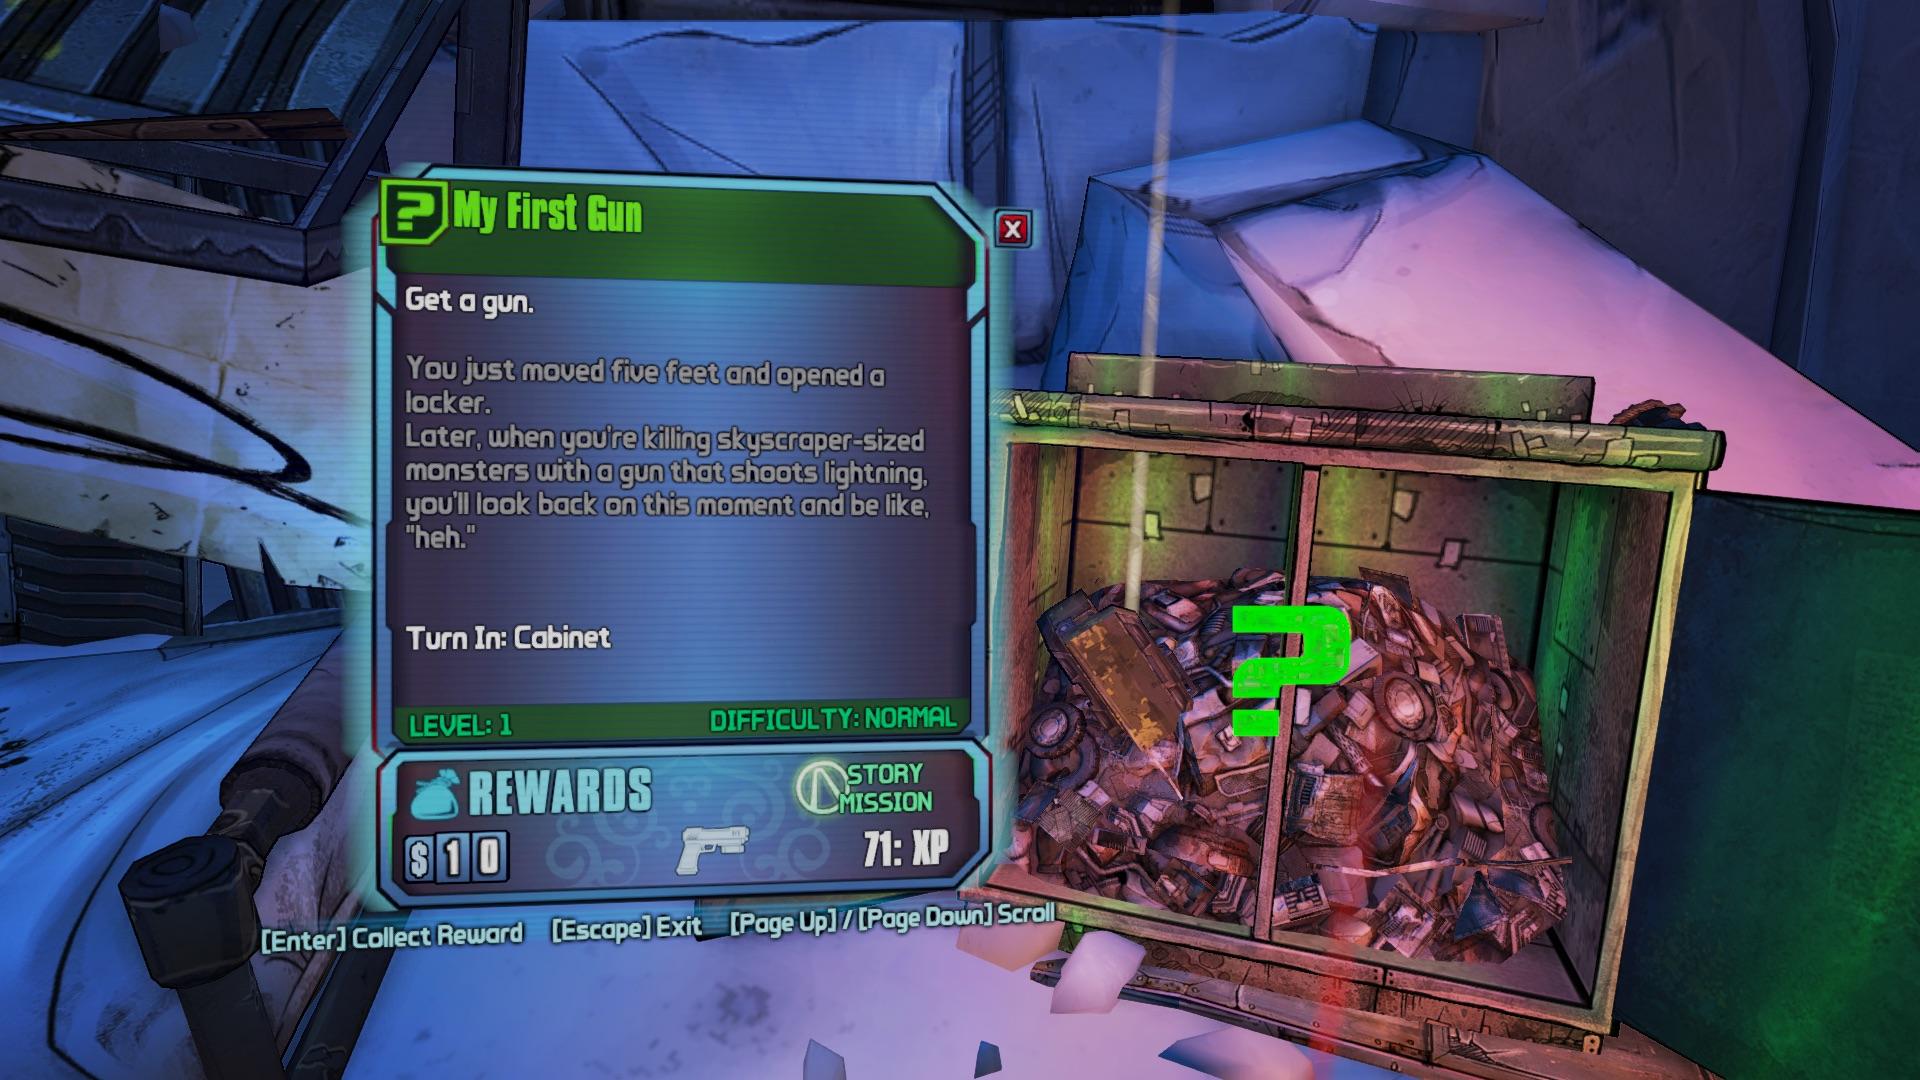 borderlands 2 my first gun - 2 My First Gun Get a gun. You just moved five feet and opened a locker. Later, when you're killing skyscrapersized monsters with a gun that shoots lightning, you'll look back on this moment and be "heh." Turn In Cabinet Diffic